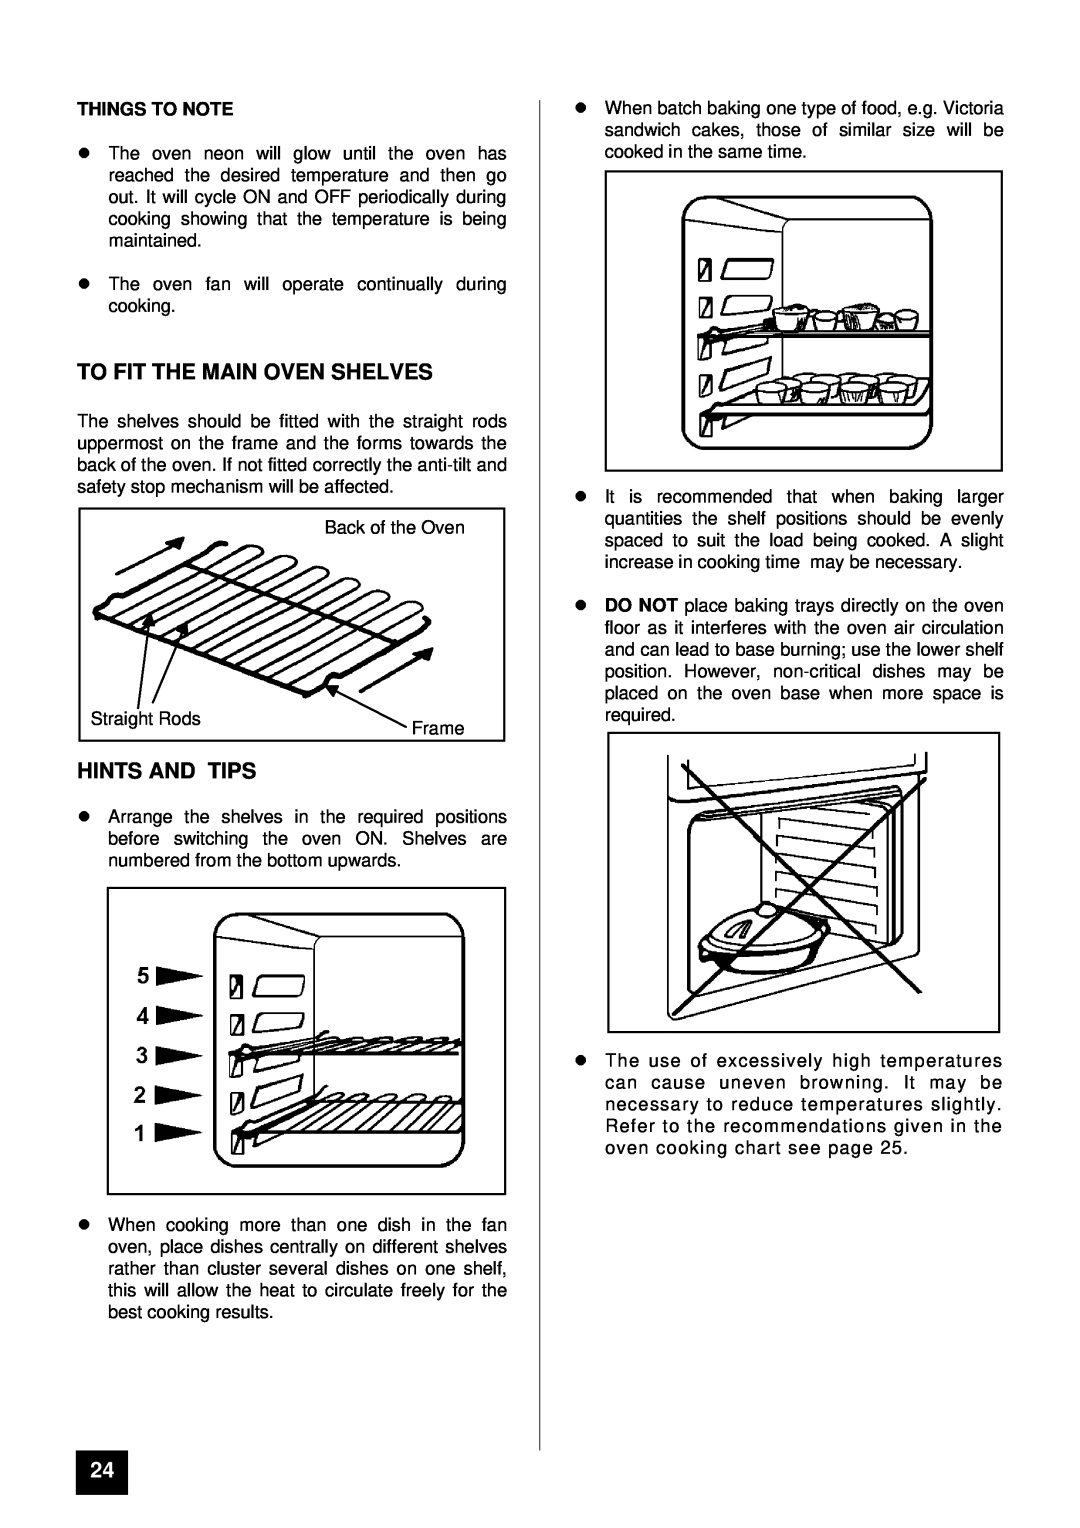 Tricity Bendix BS 615 SO installation instructions To Fit The Main Oven Shelves, lHINTS AND TIPS, Things To Note 